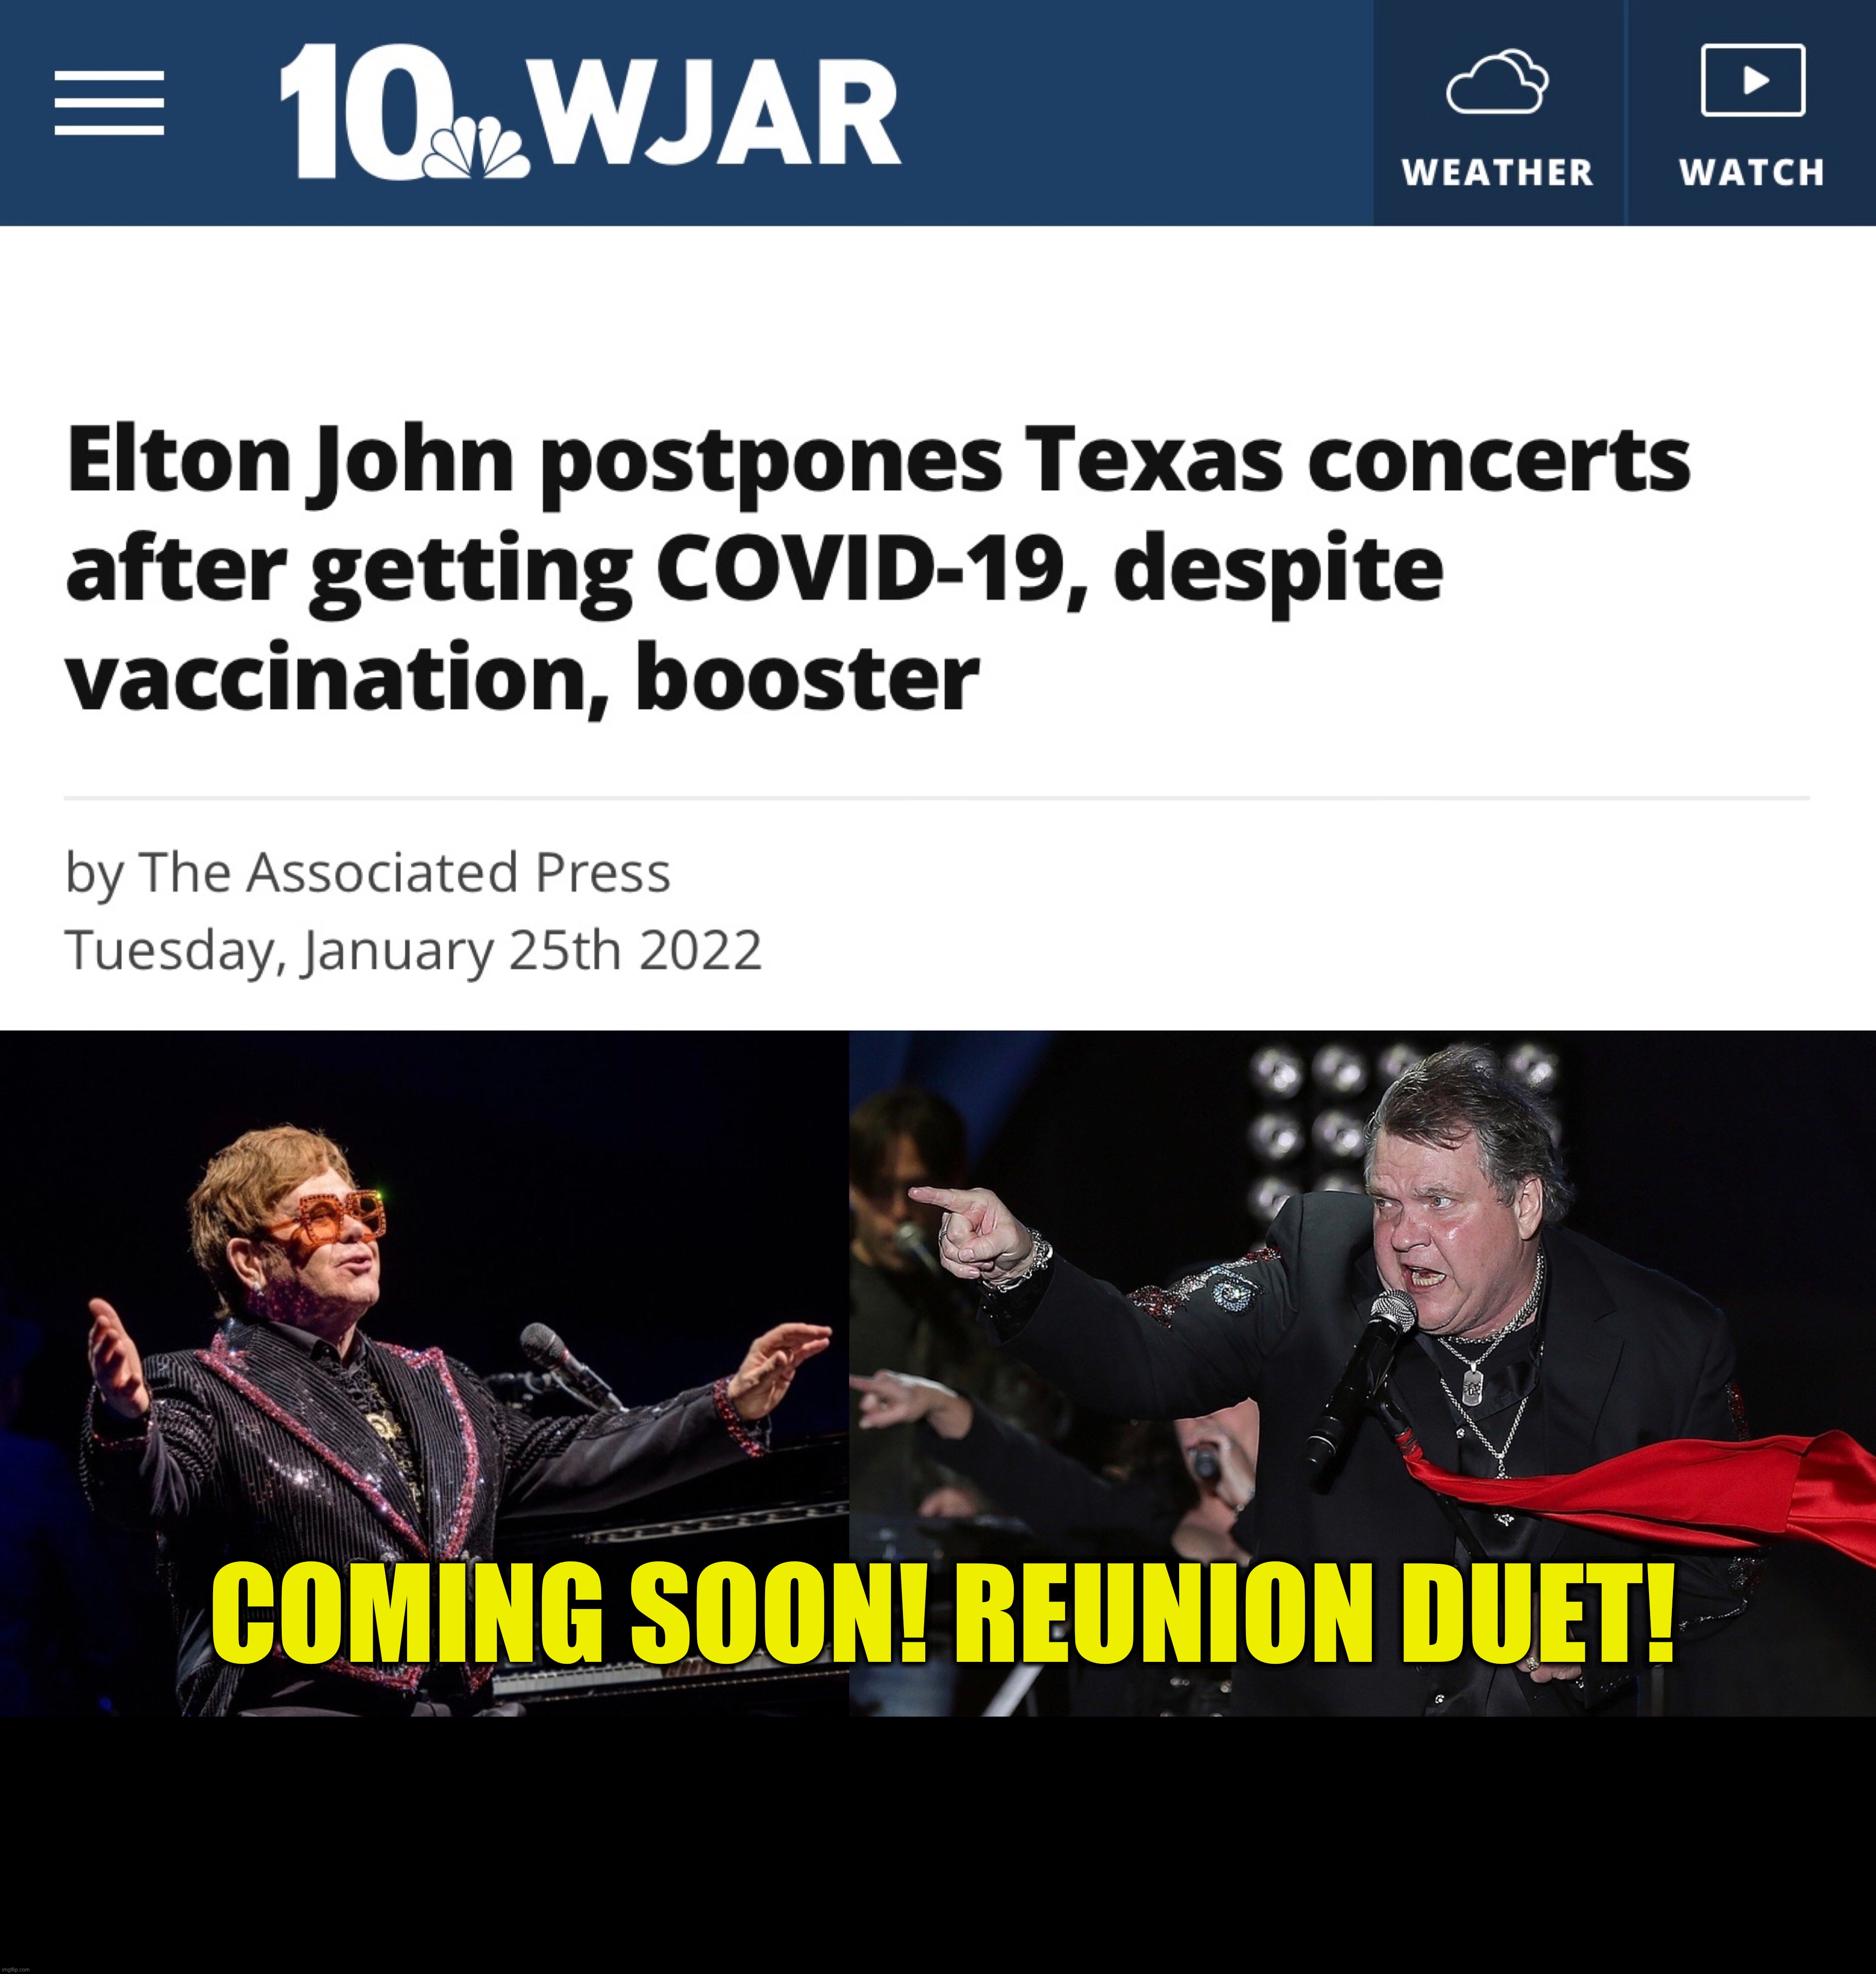 COMING SOON! REUNION DUET! | image tagged in memes,covid vaccine,covid-19,politics,meatloaf,elton john | made w/ Imgflip meme maker